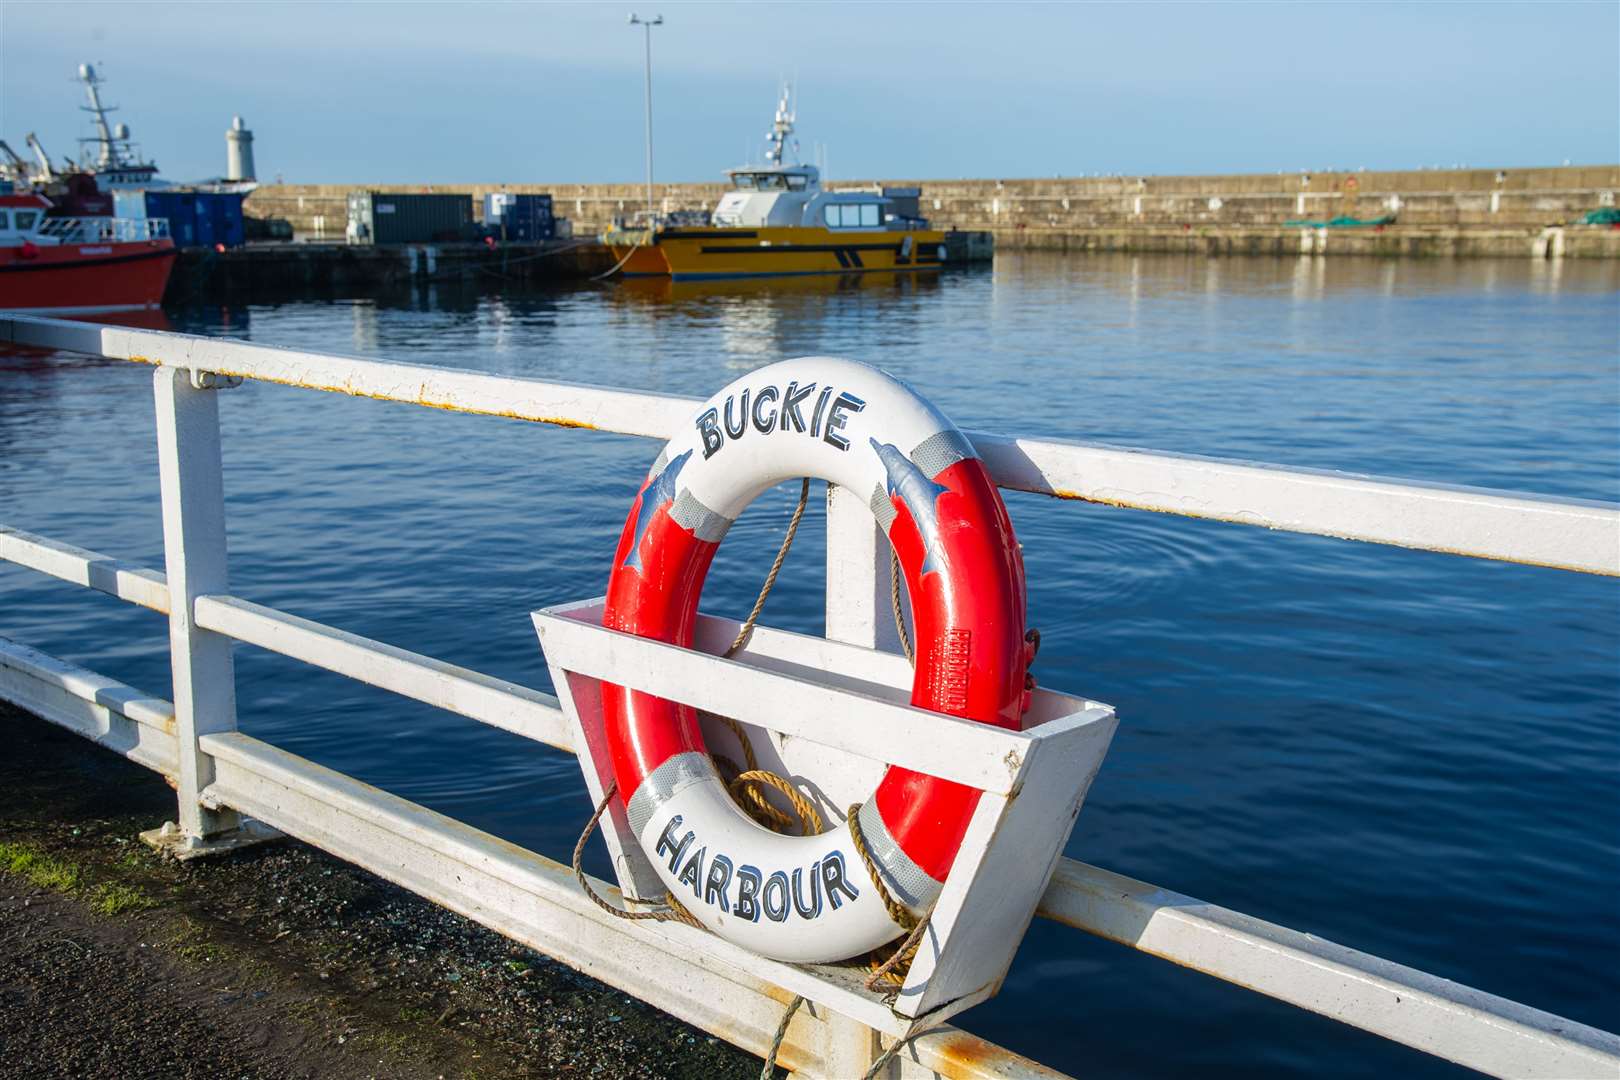 It was a busier week of fish landings at Buckie Harbour. Picture: Daniel Forsyth